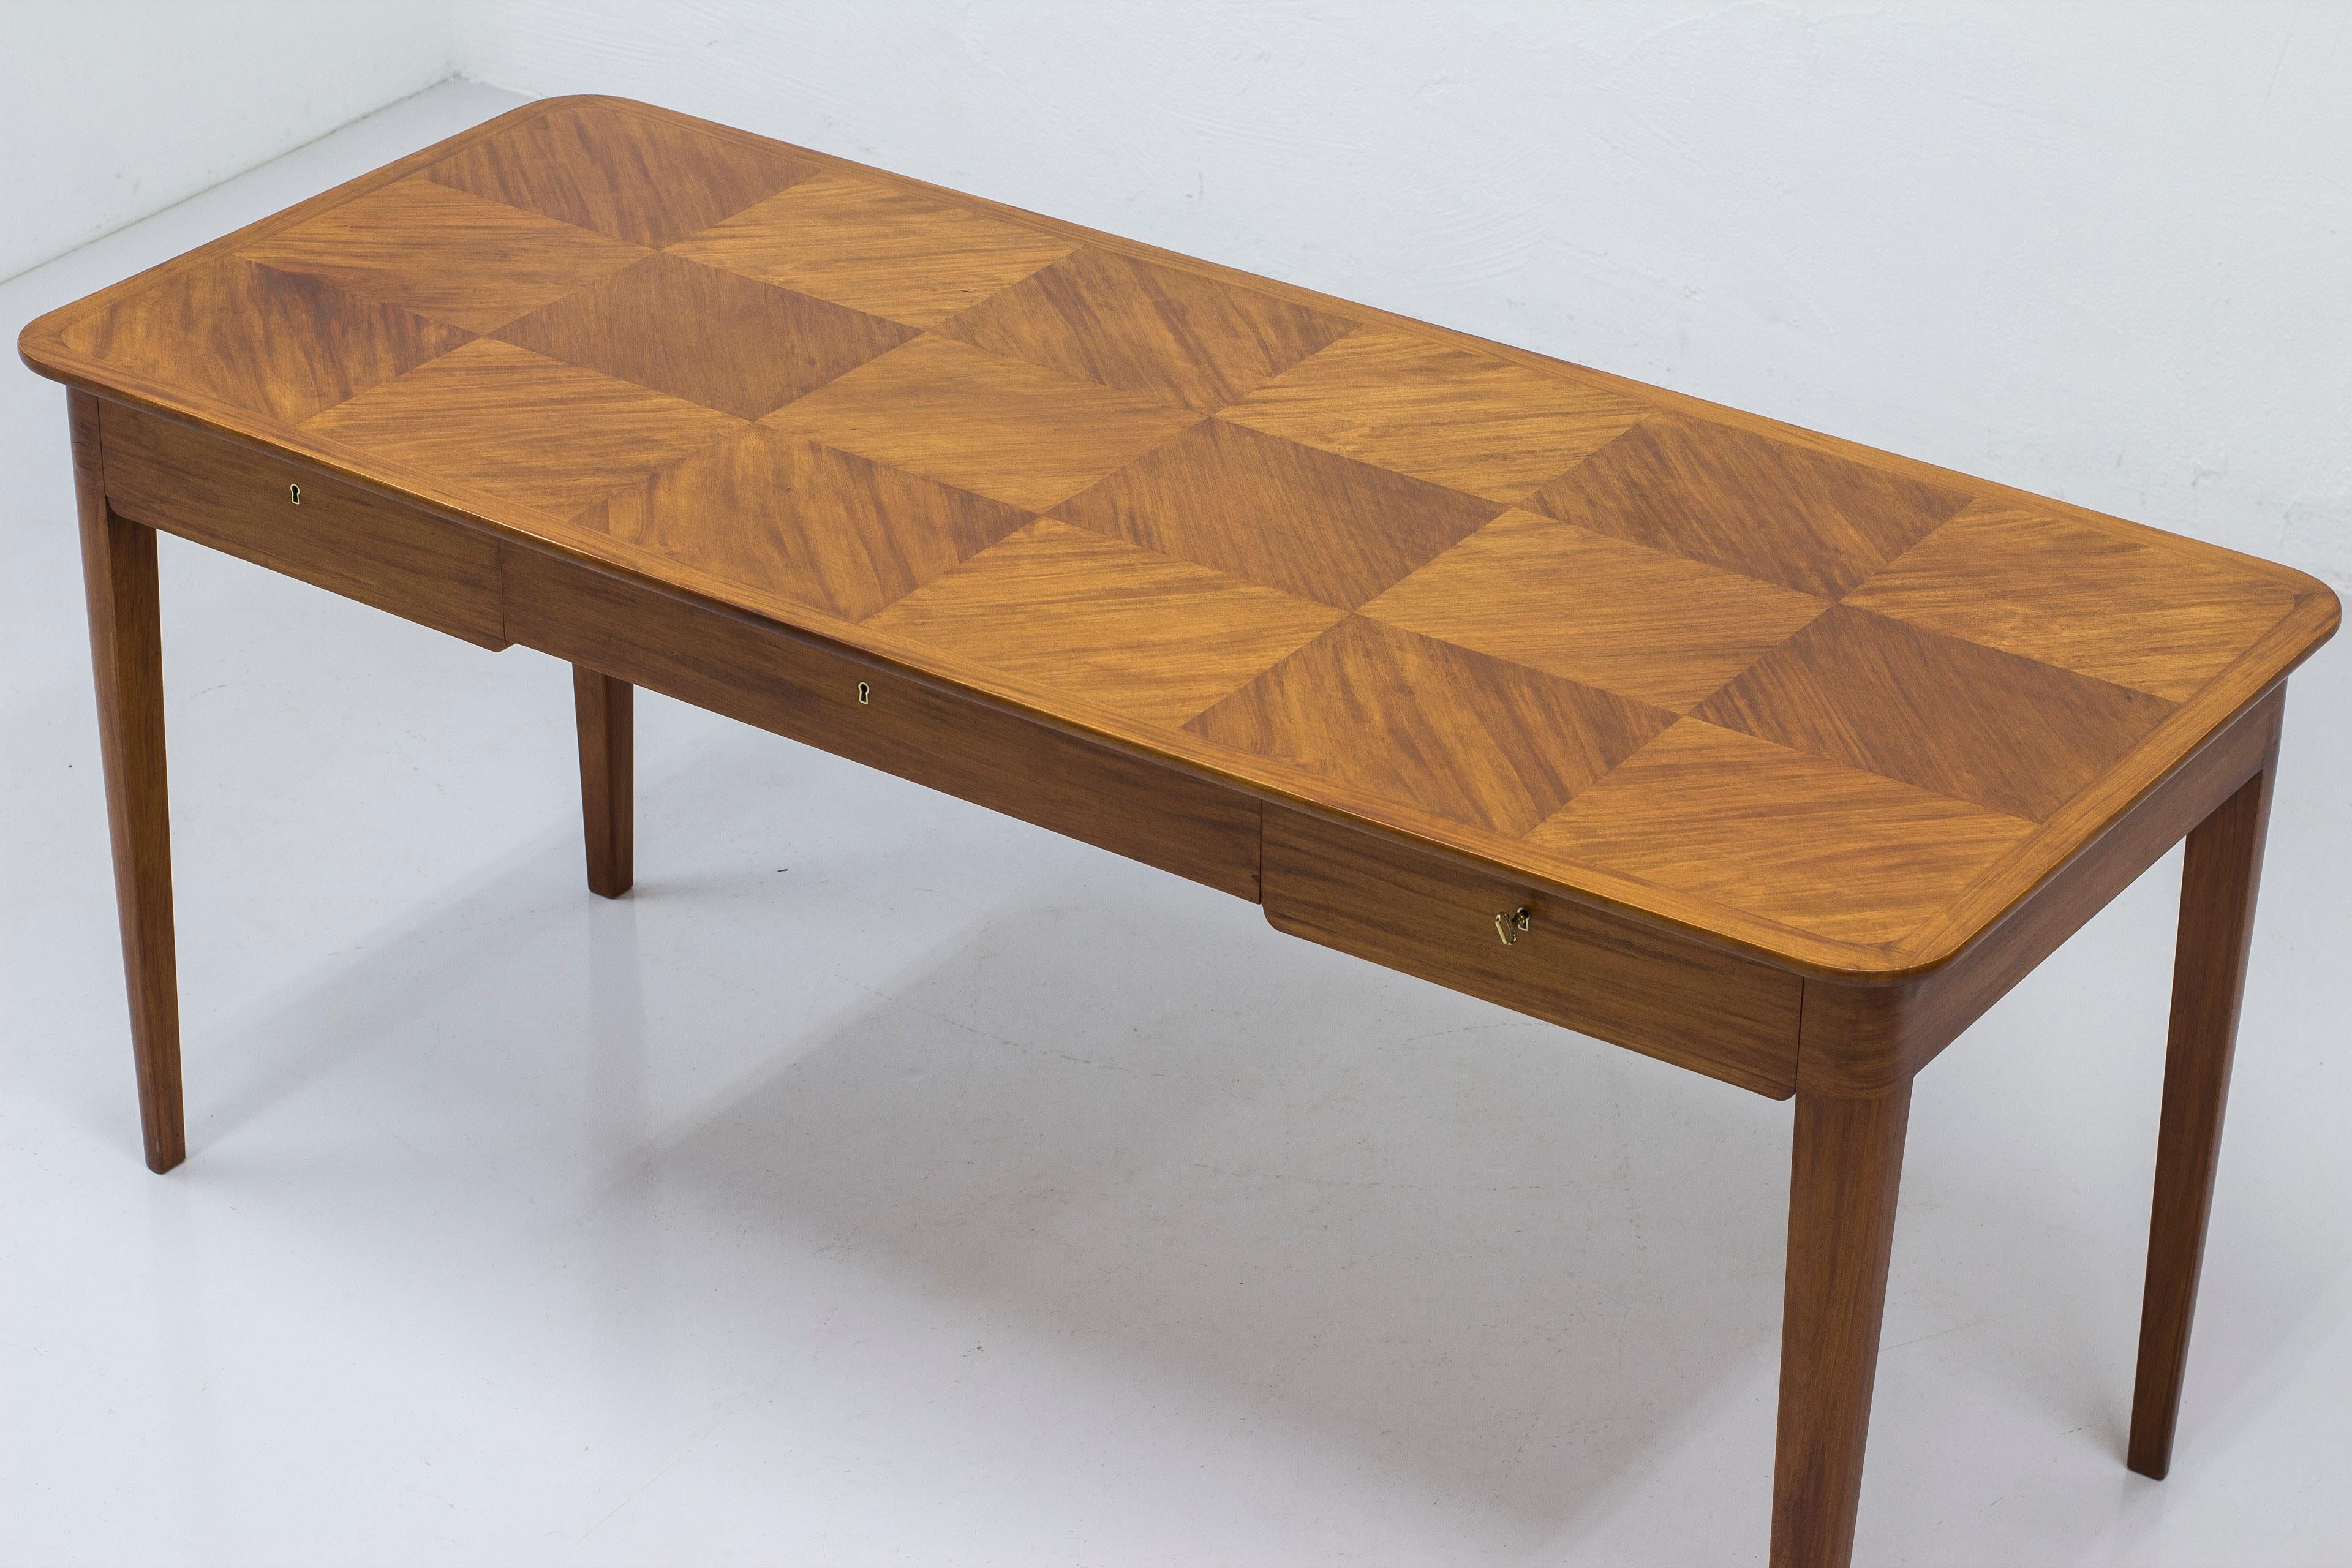 Mid-20th Century Swedish modern desk by Oscar Nilsson from 1938, checker table top